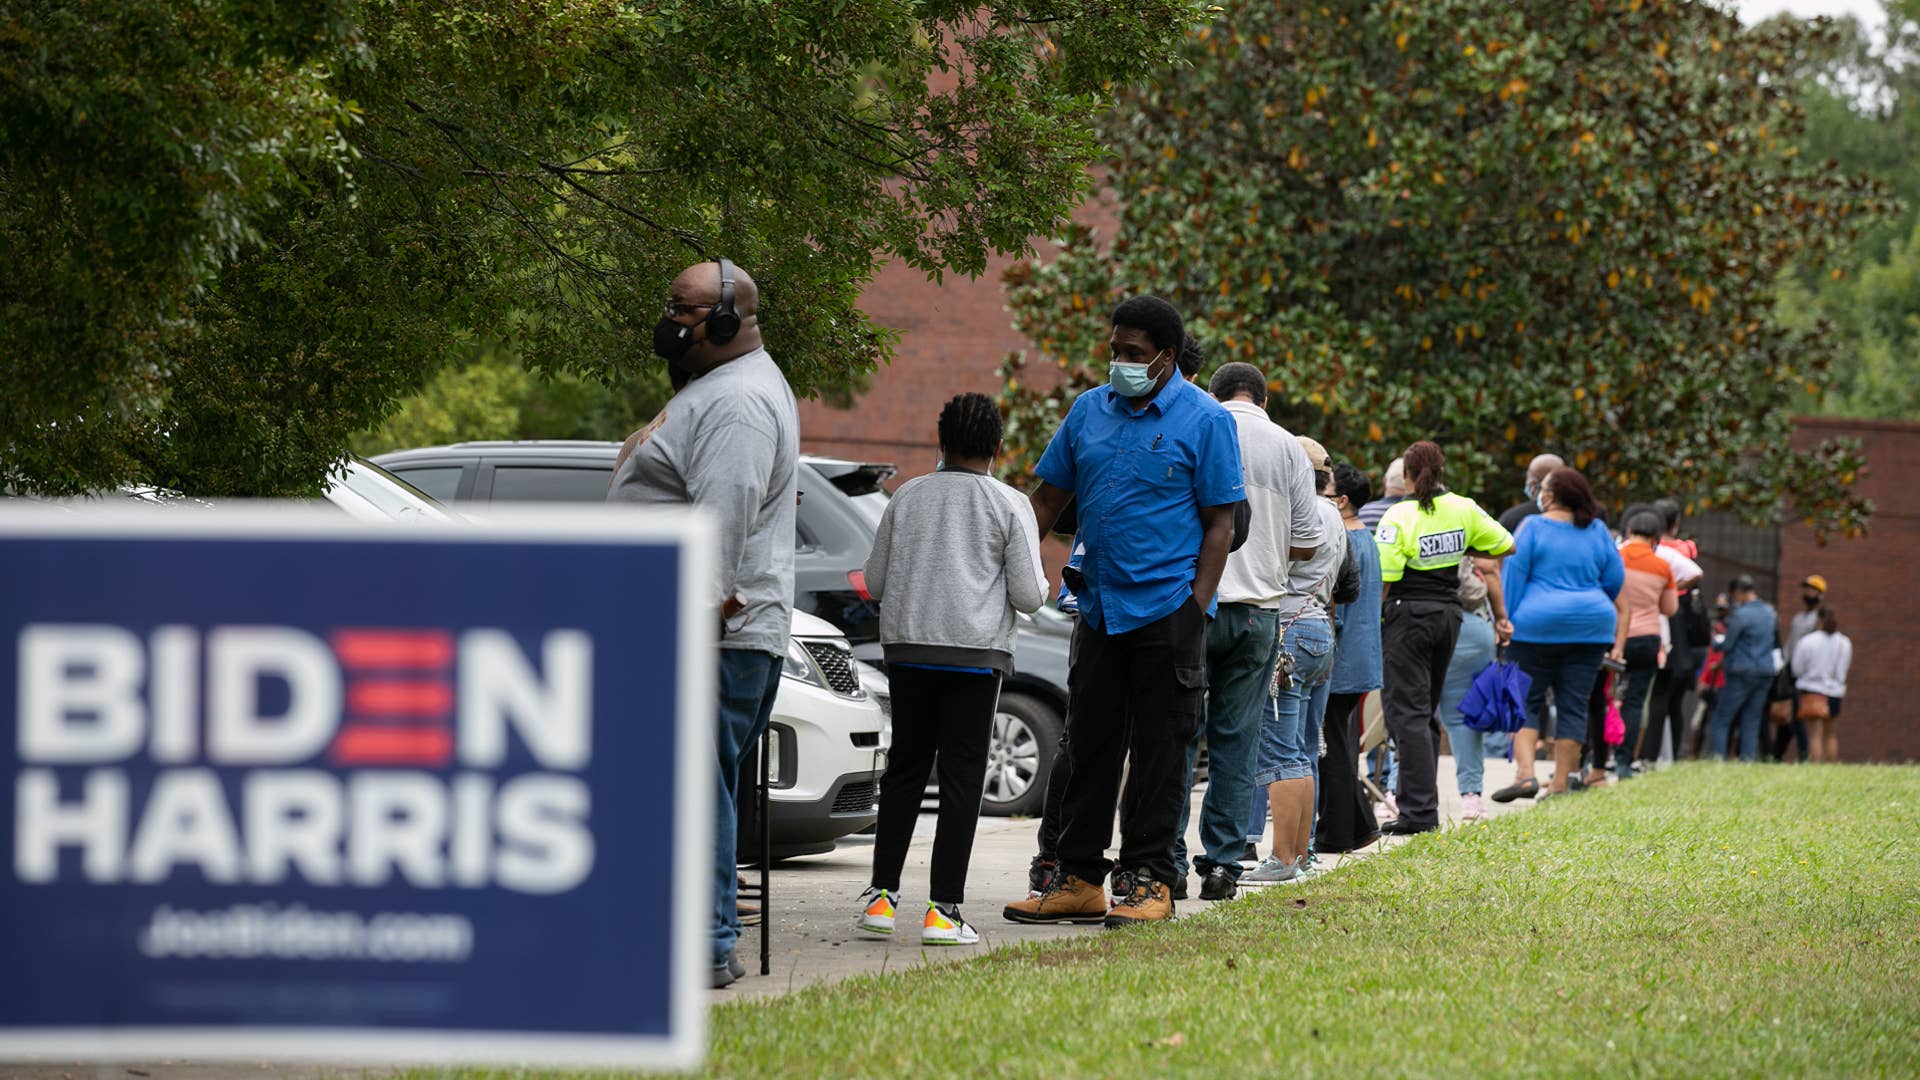 Voters lined up to vote in Georgia